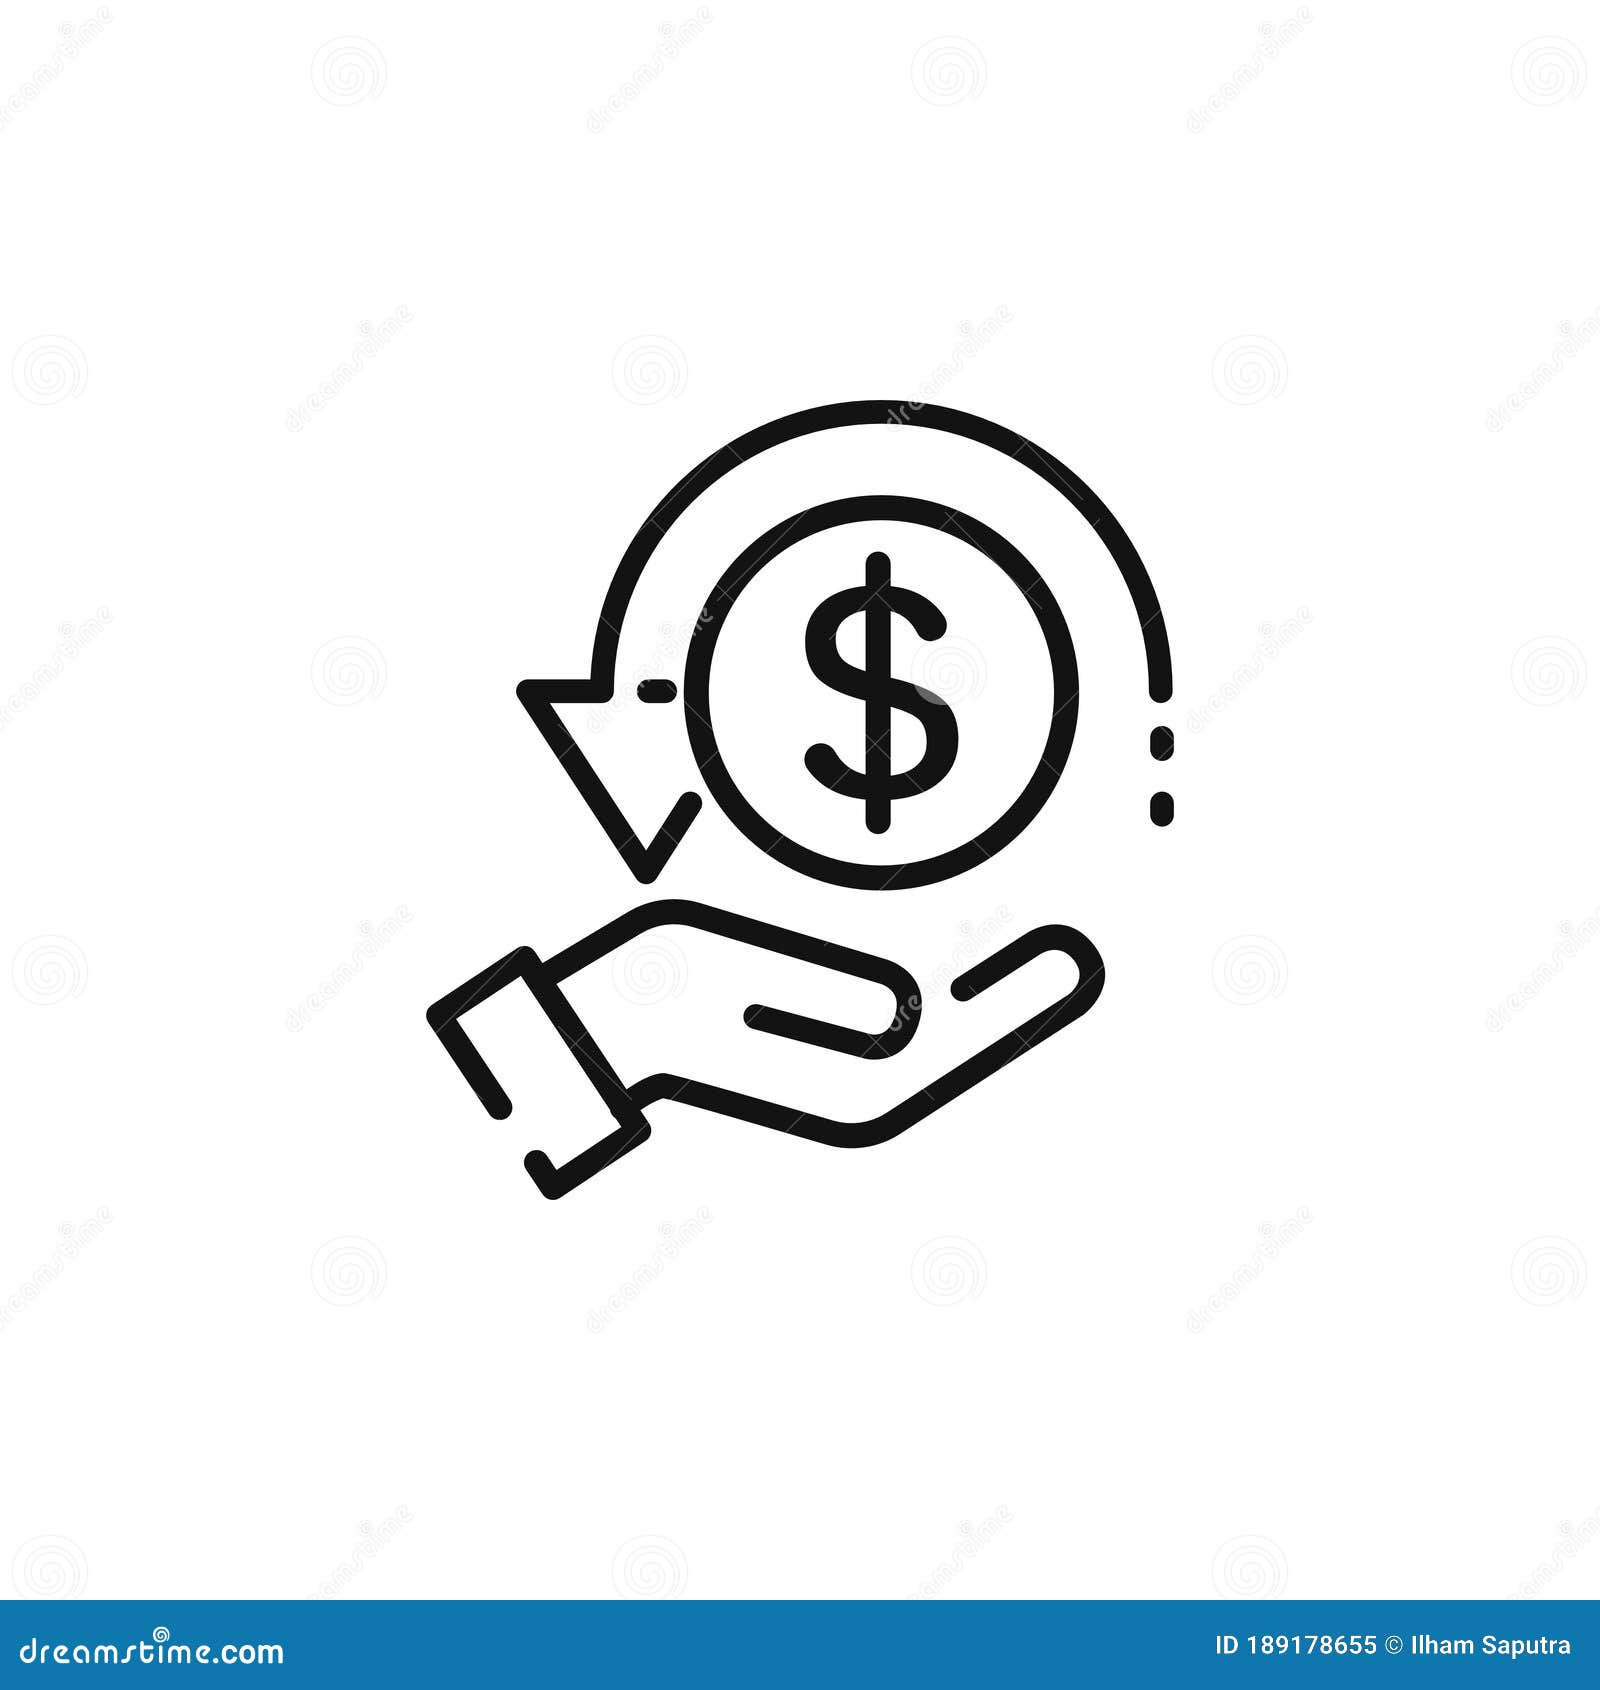 rebate-cartoons-illustrations-vector-stock-images-11942-pictures